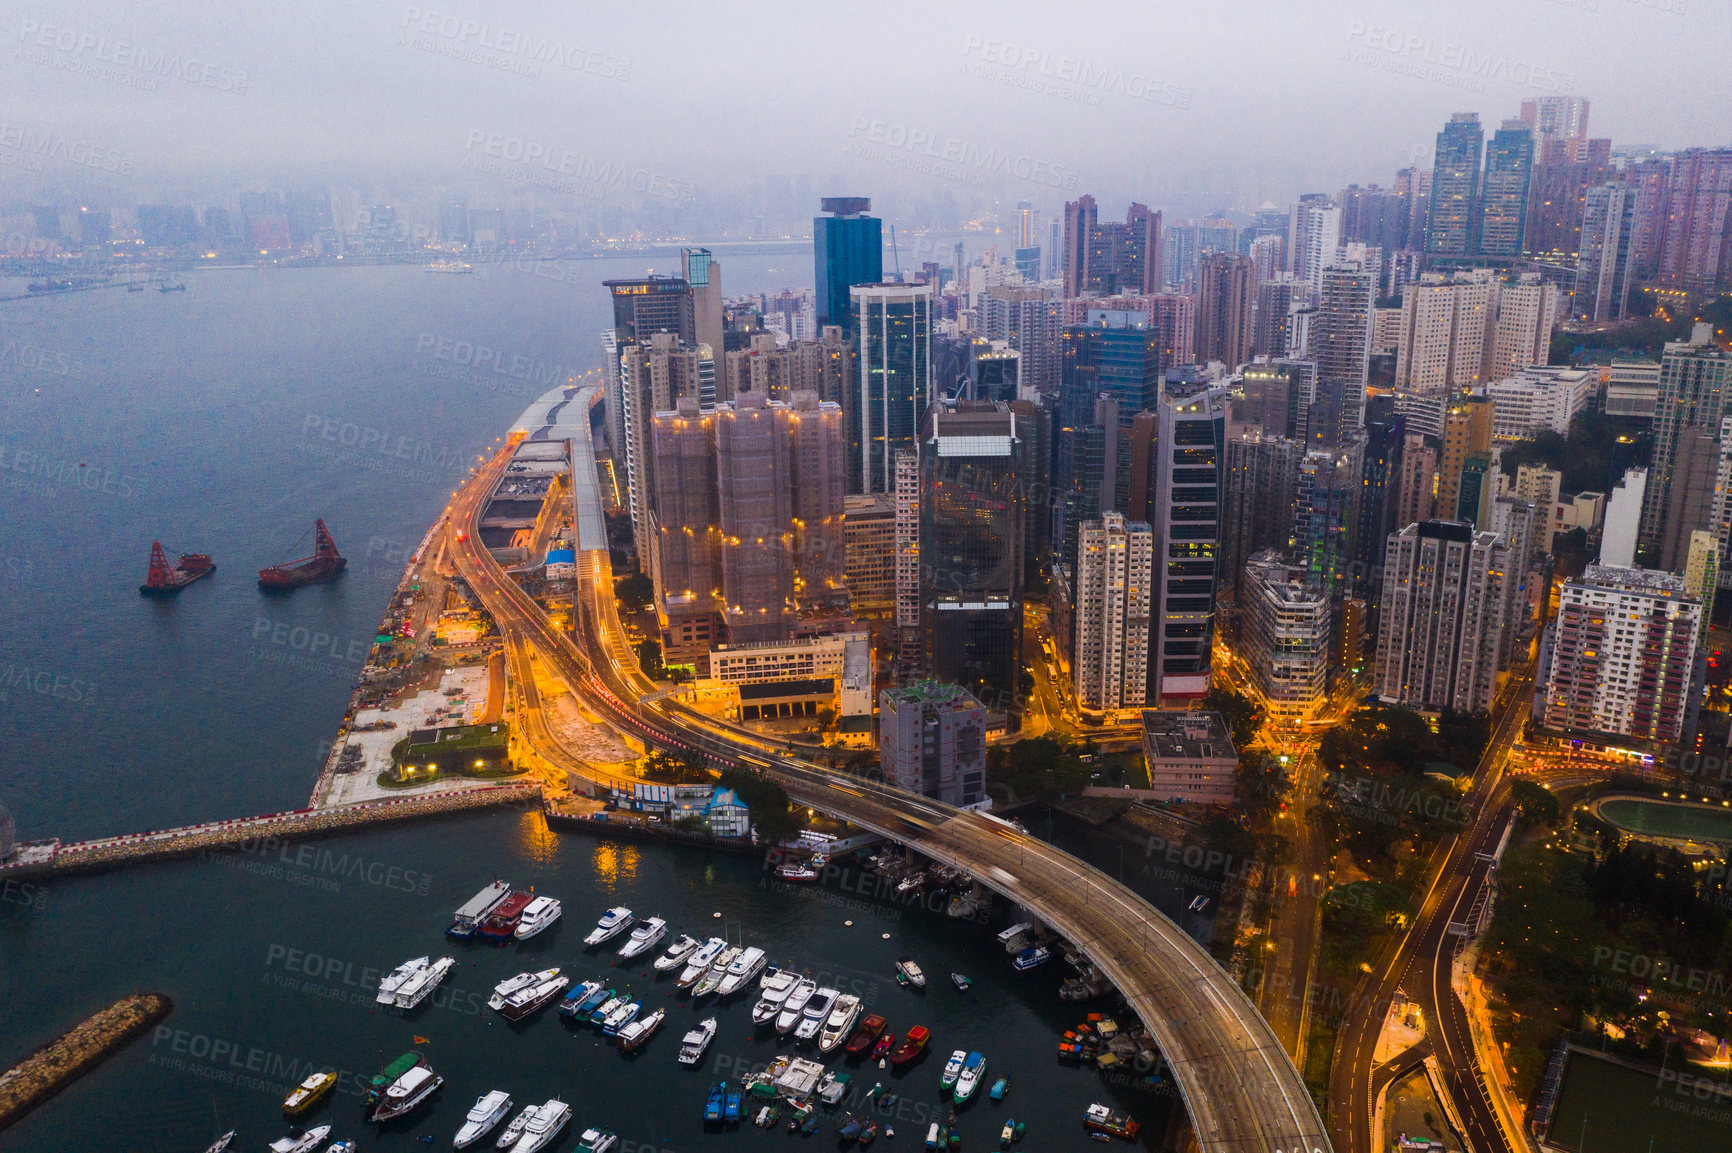 Buy stock photo Buildings, ocean and aerial view of the city at night with lights, boats and ships on the sea harbor. Landscape, architecture and drone of an urban town with skyscrapers, yachts and infrastructure.